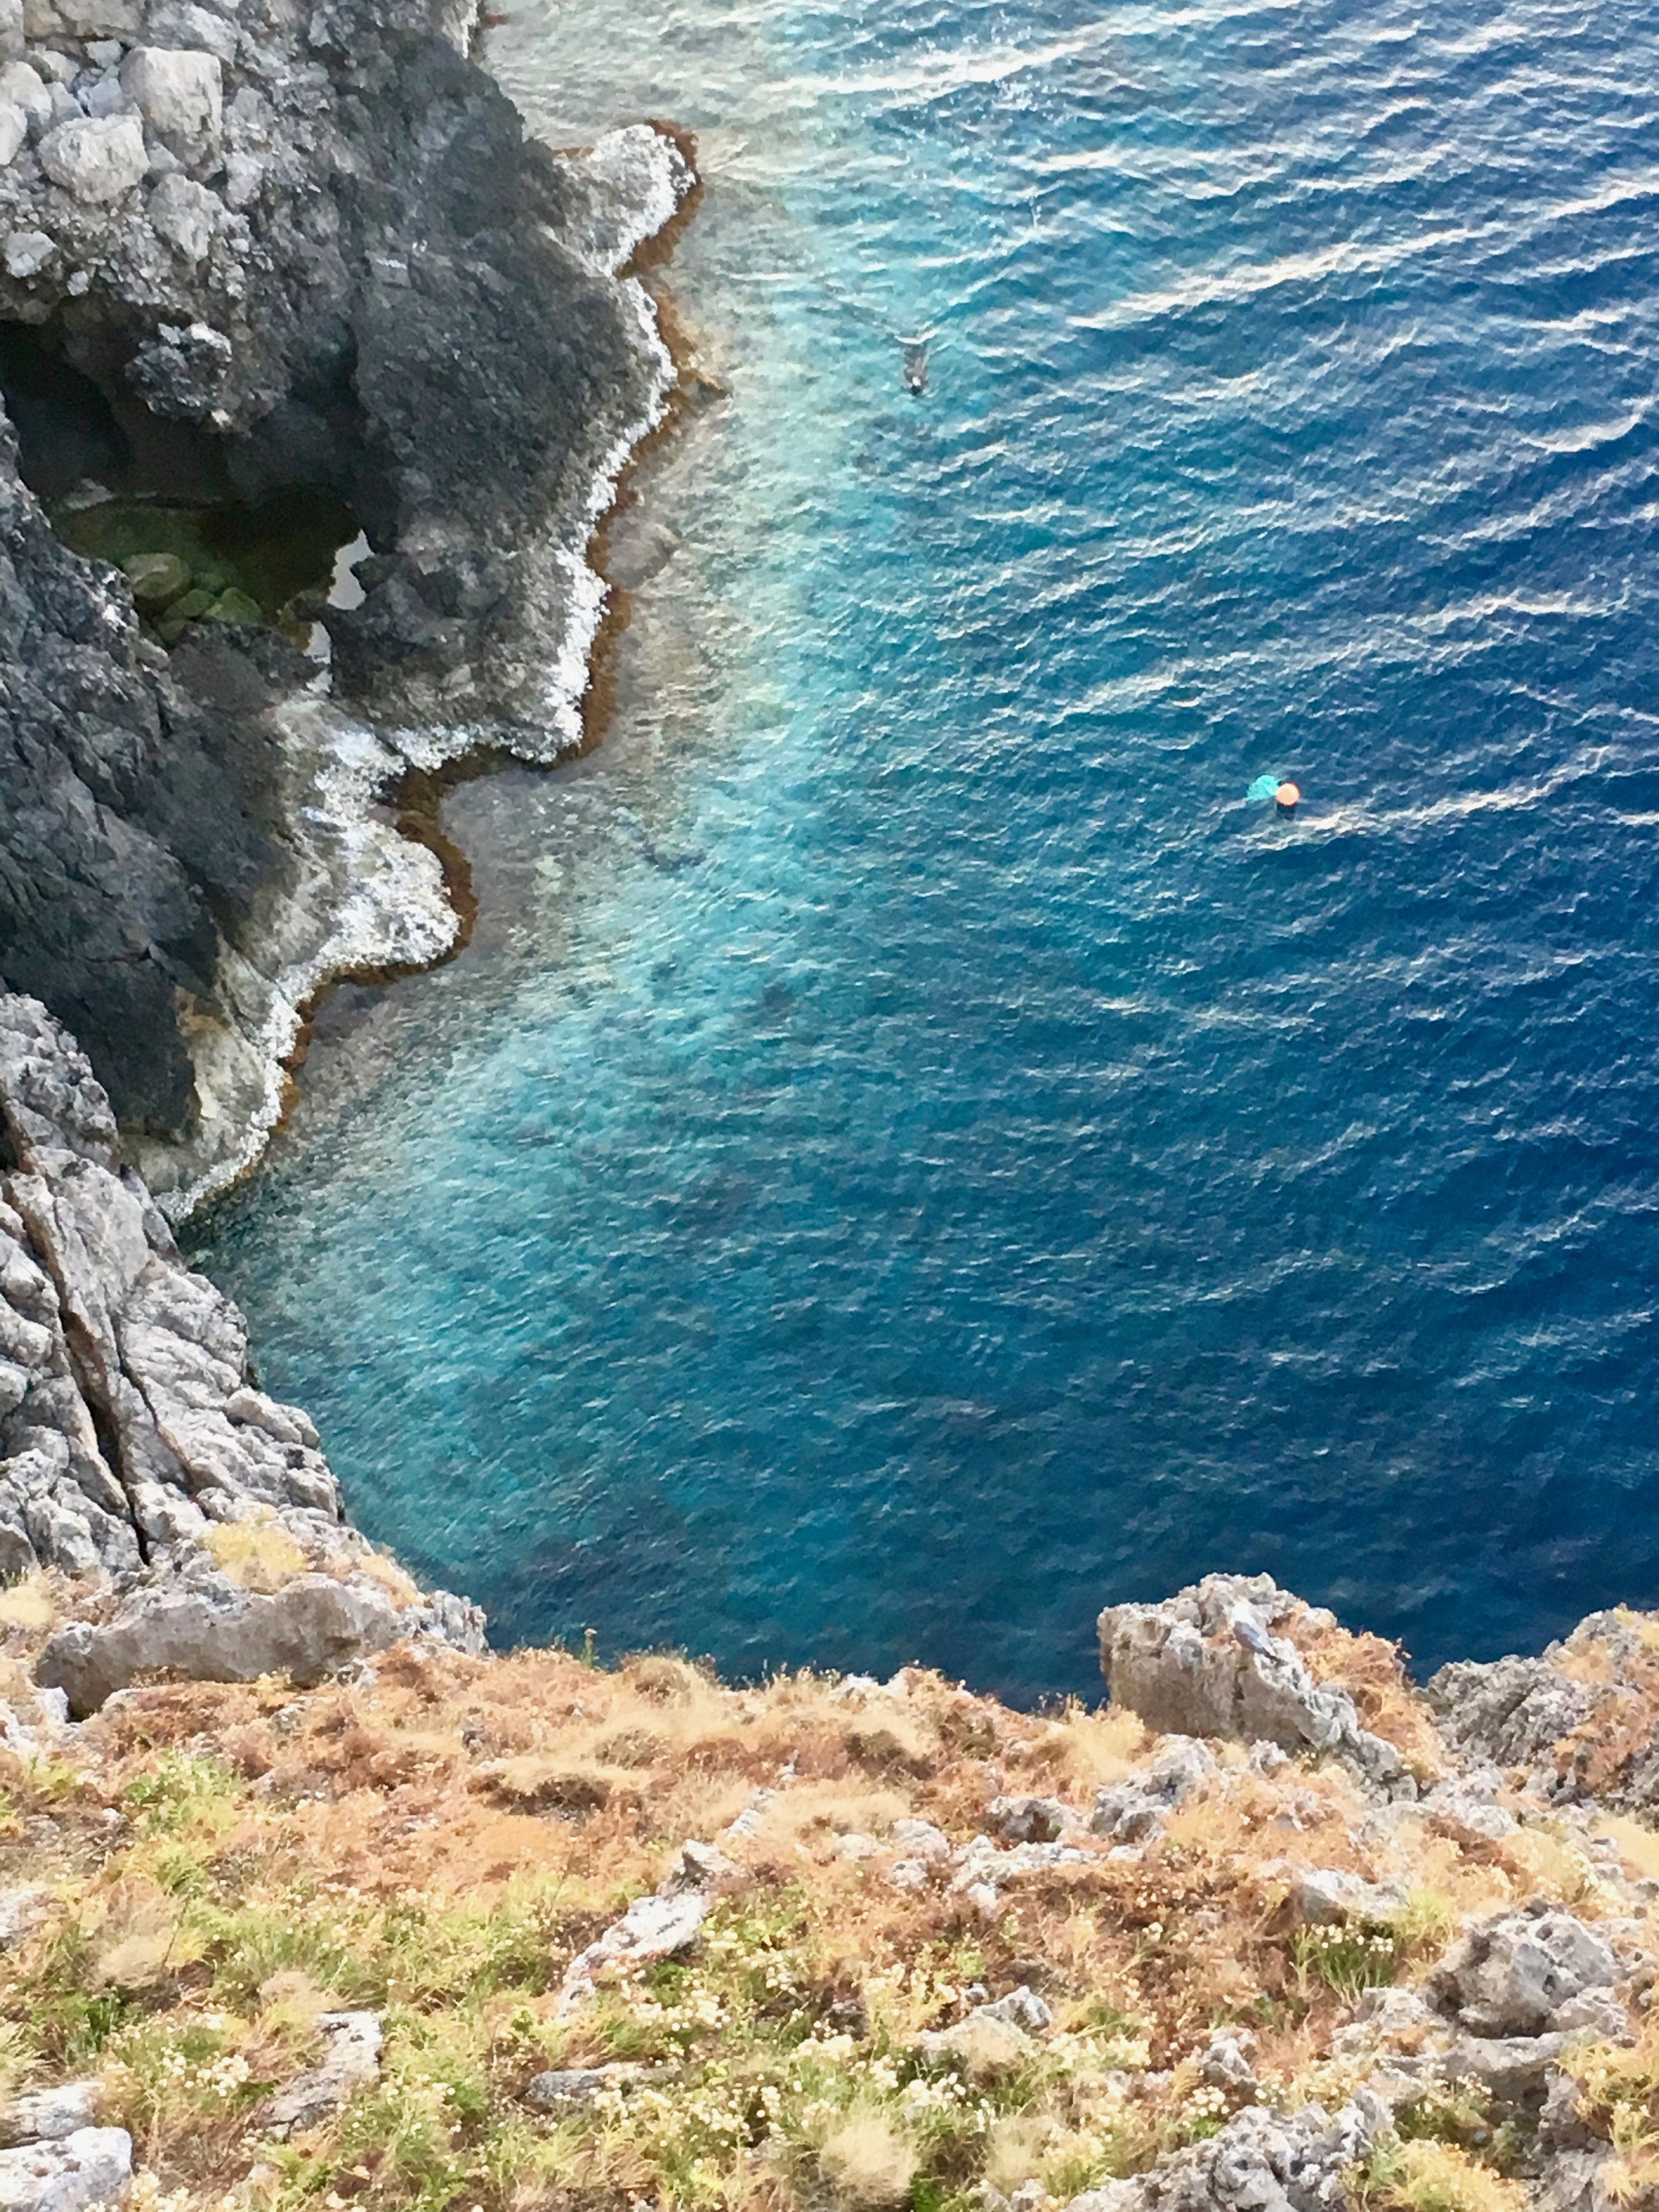    A view from the location of the cliff predicament on The Egg, visible in the water far below towards the top of the photograph is the Mediterranean Monk Seal, Monachus monachus.   